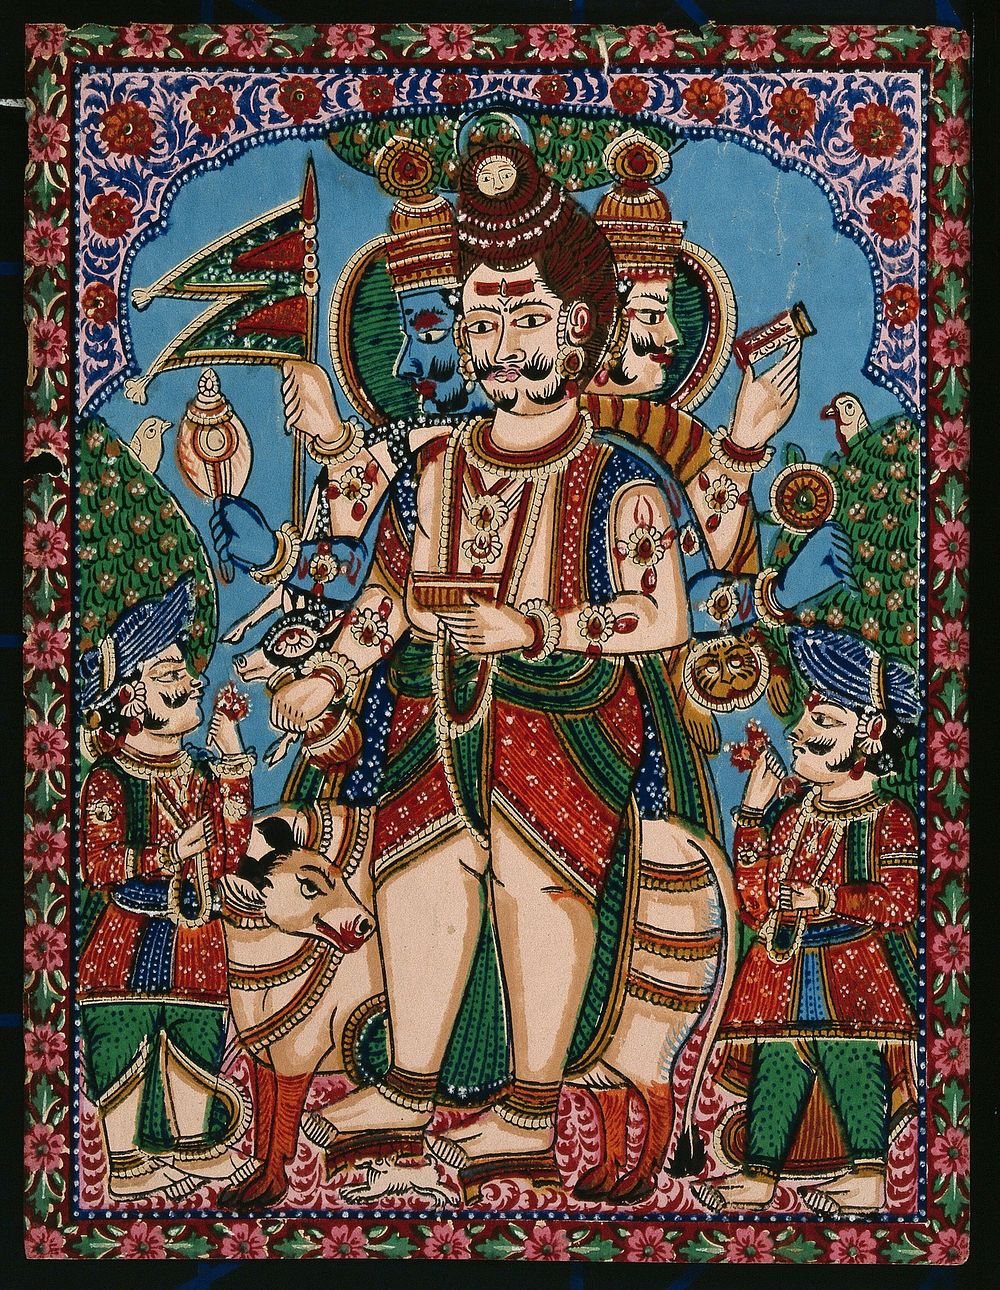 Trimurti; a three headed god with Shiva in the center, Vishnu on the left and Brahma on the right, standing before Nandi…